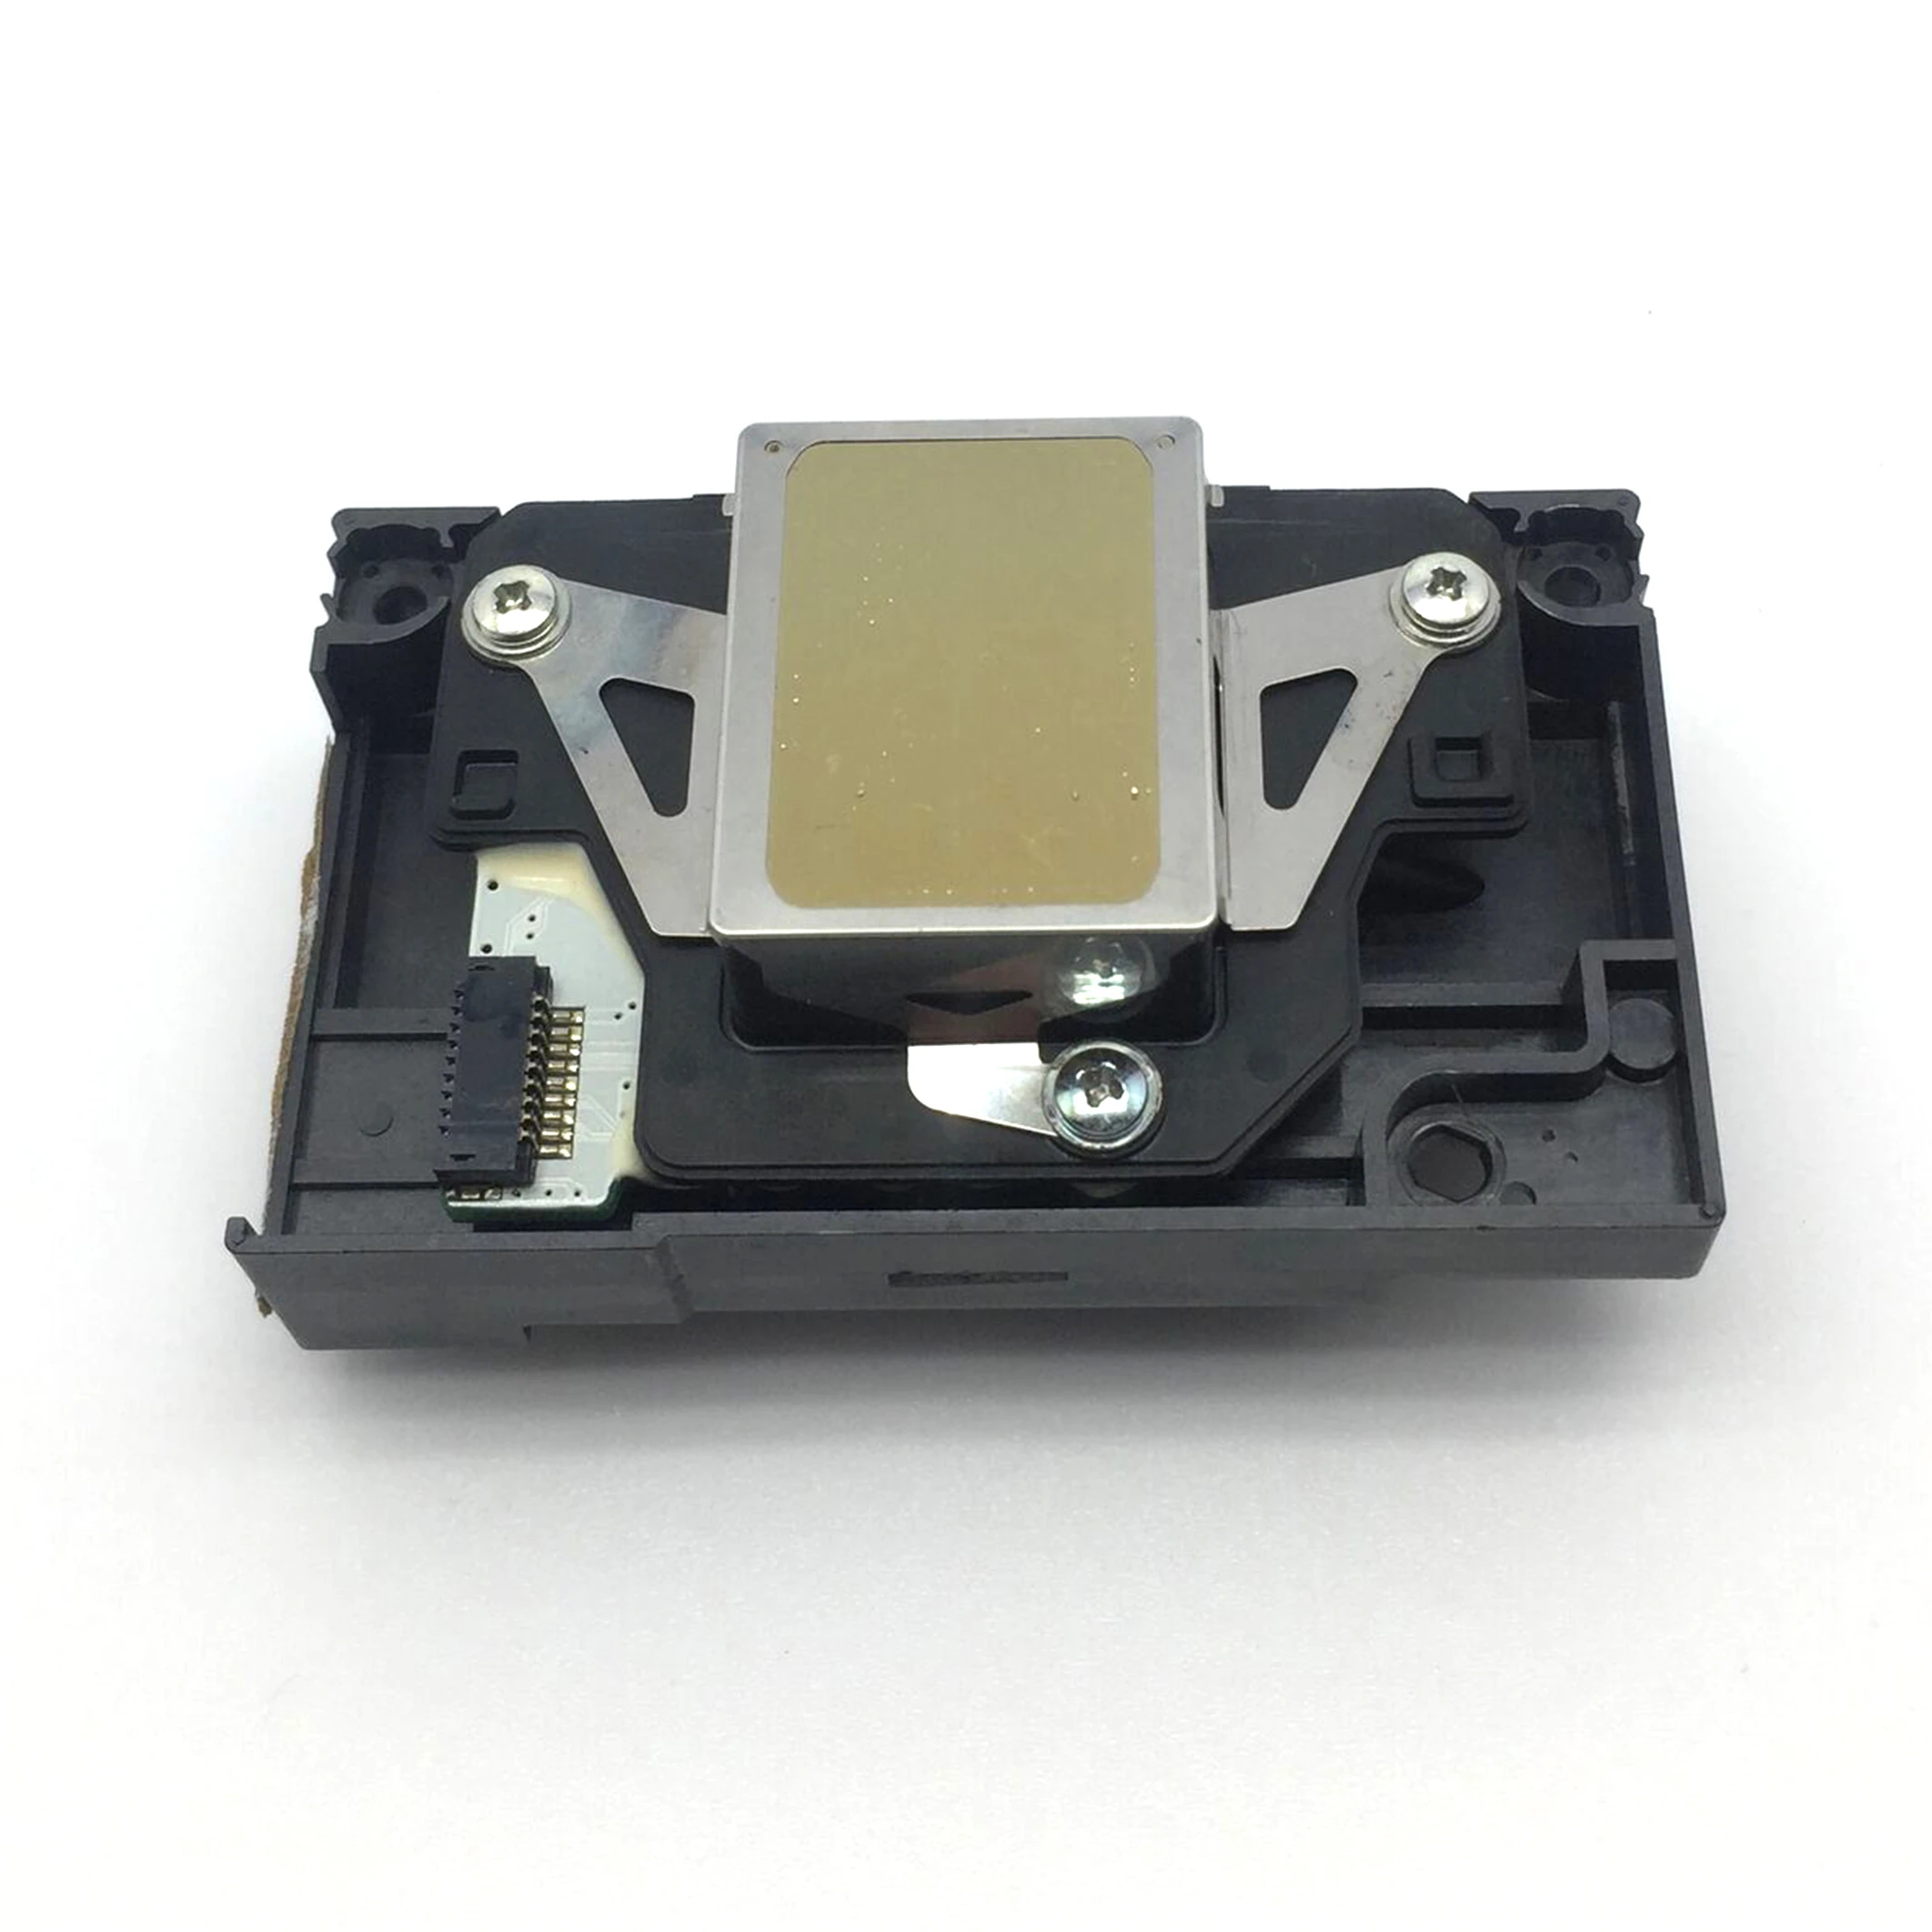 

Printhead Print Head F173070 Fits For Epson RX590 1390 G850 1410 D870 EP4004 G4500 PM-A820 L1800 1400 water-based A820 EP4001